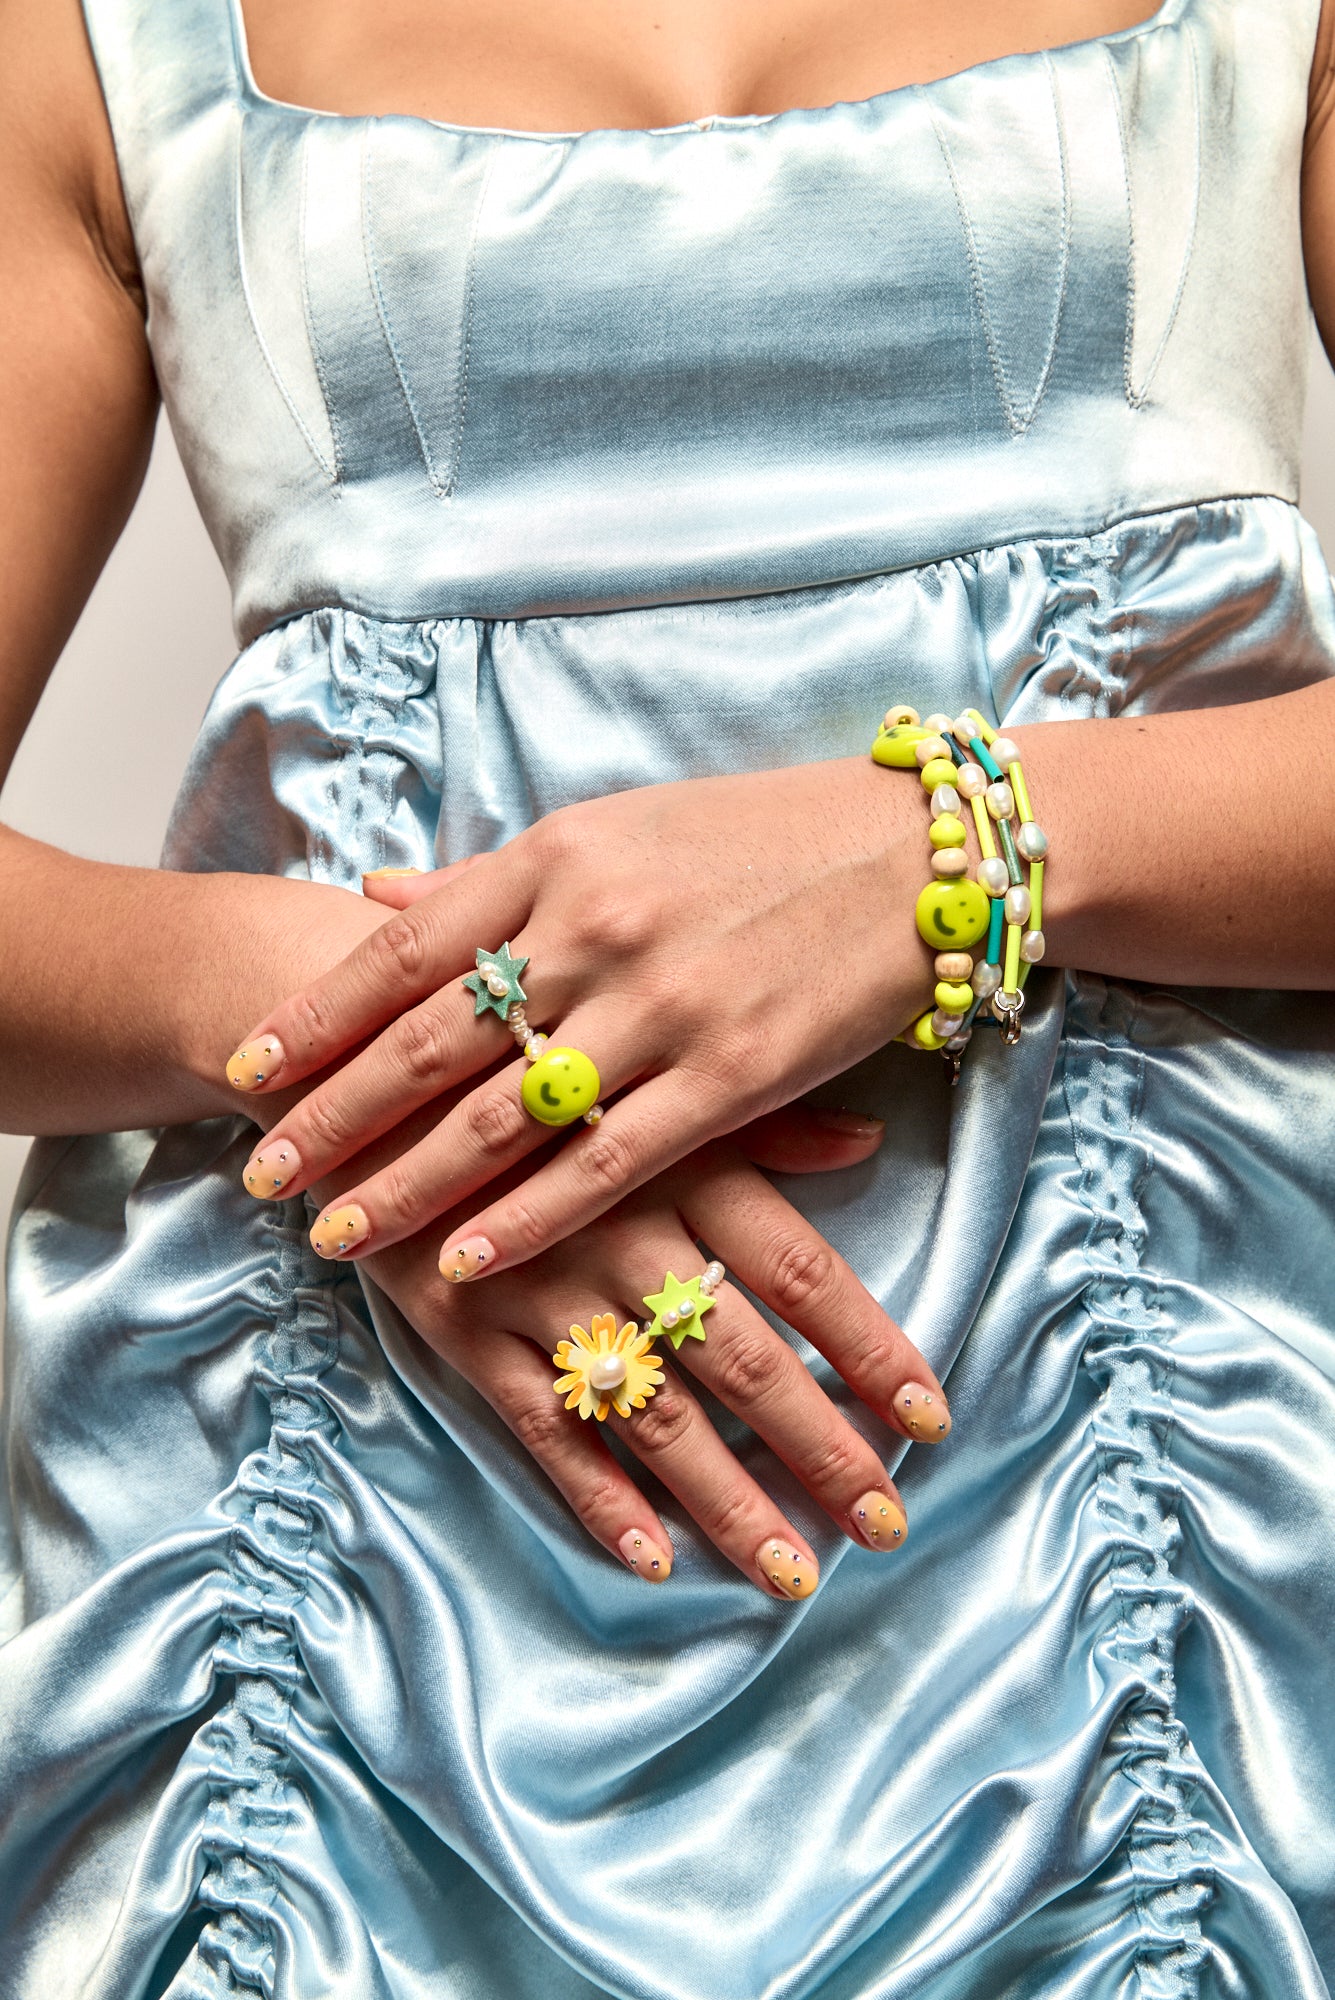 Bianca Mavrick x Lawn Bowls Collaboration Model Wearing Smiley Ring and Bracelet